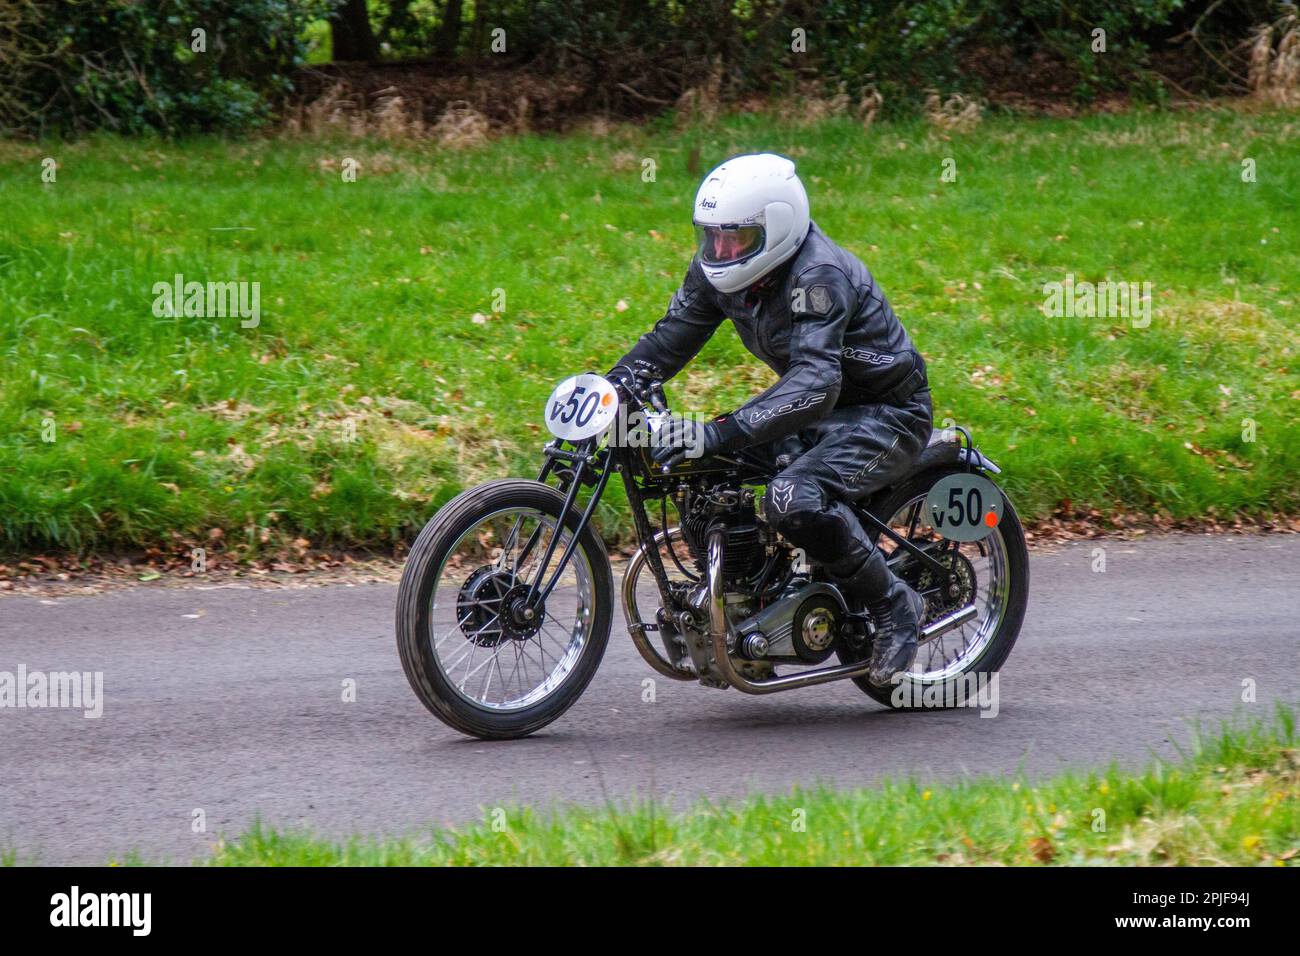 Bike No.50 1930 30s thirties Rudge Sprinter motorcycle ridden by Richard Morgan, at the HOGHTON TOWER SPRINT COURSE 1/8th timed mile drive. Stock Photo